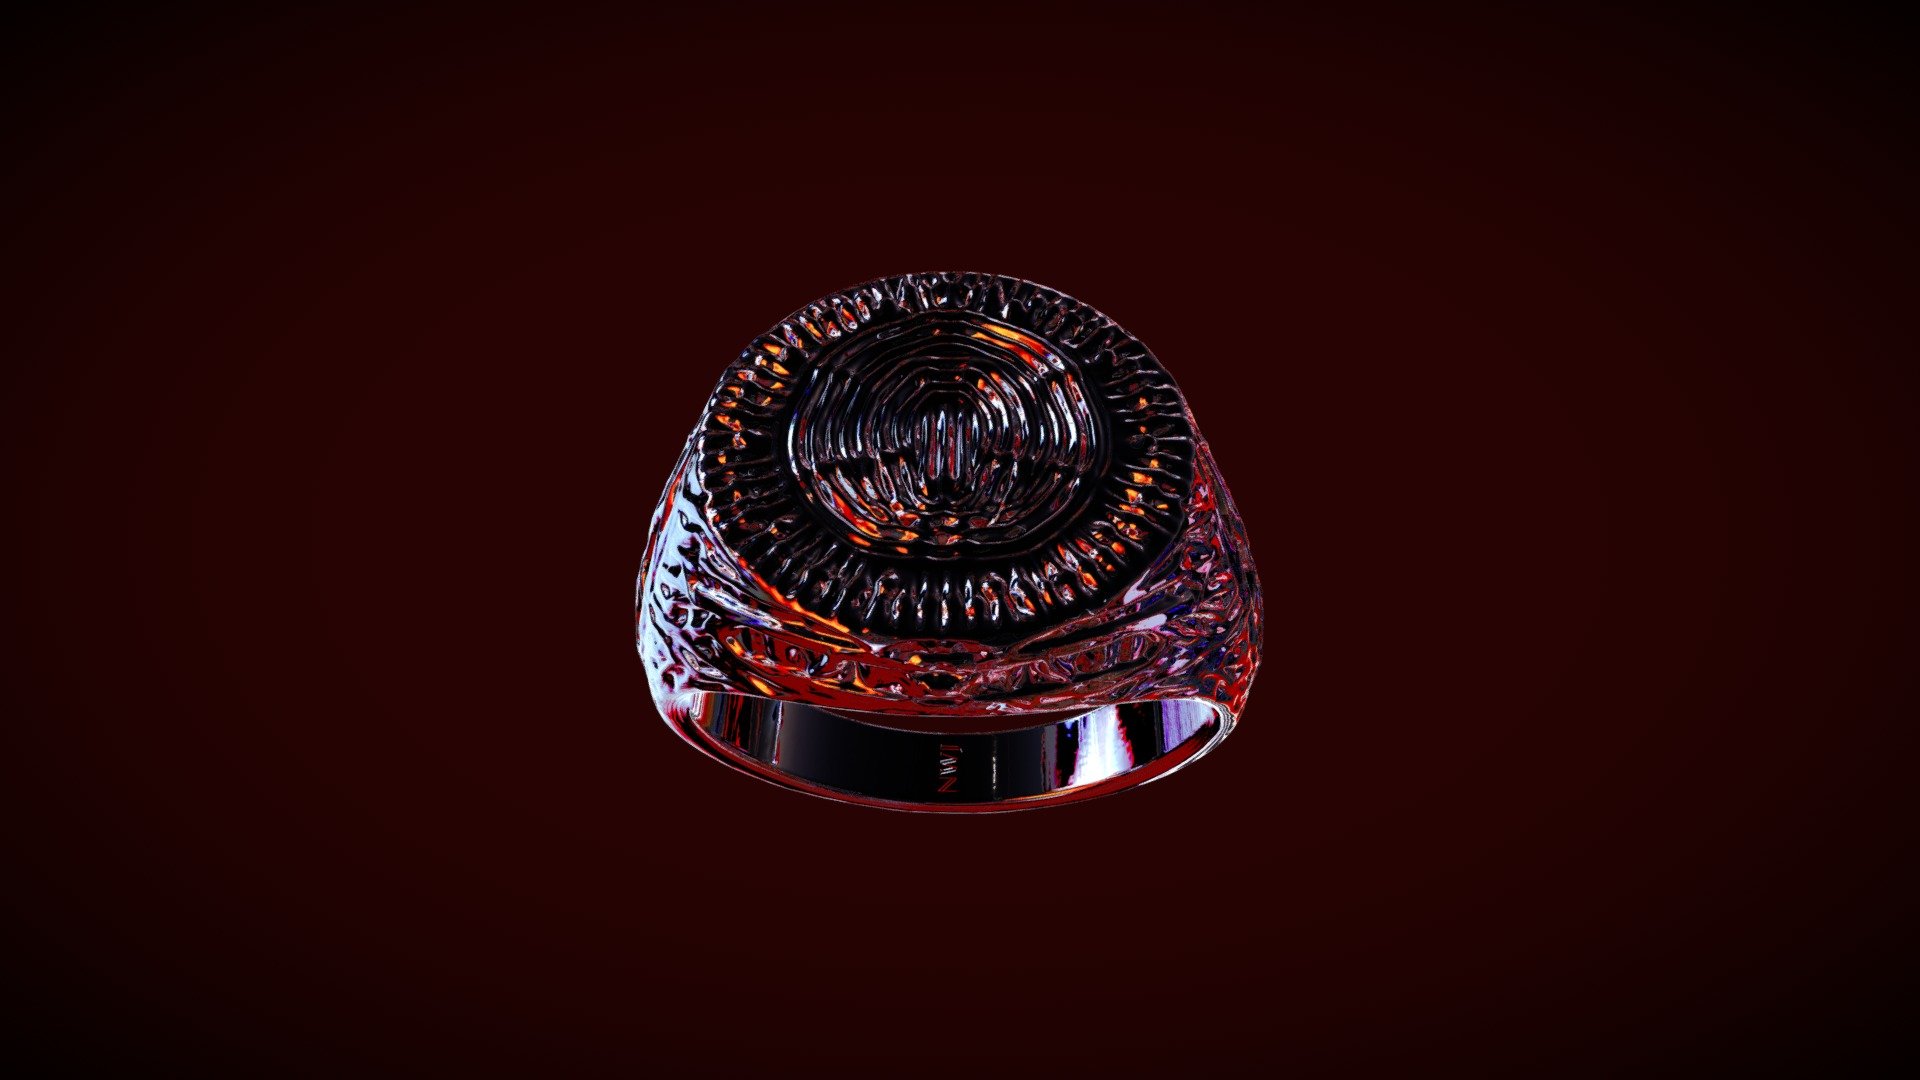 Size: 19mm - Xeno Signet Ring - 3D model by Duduism 3d model